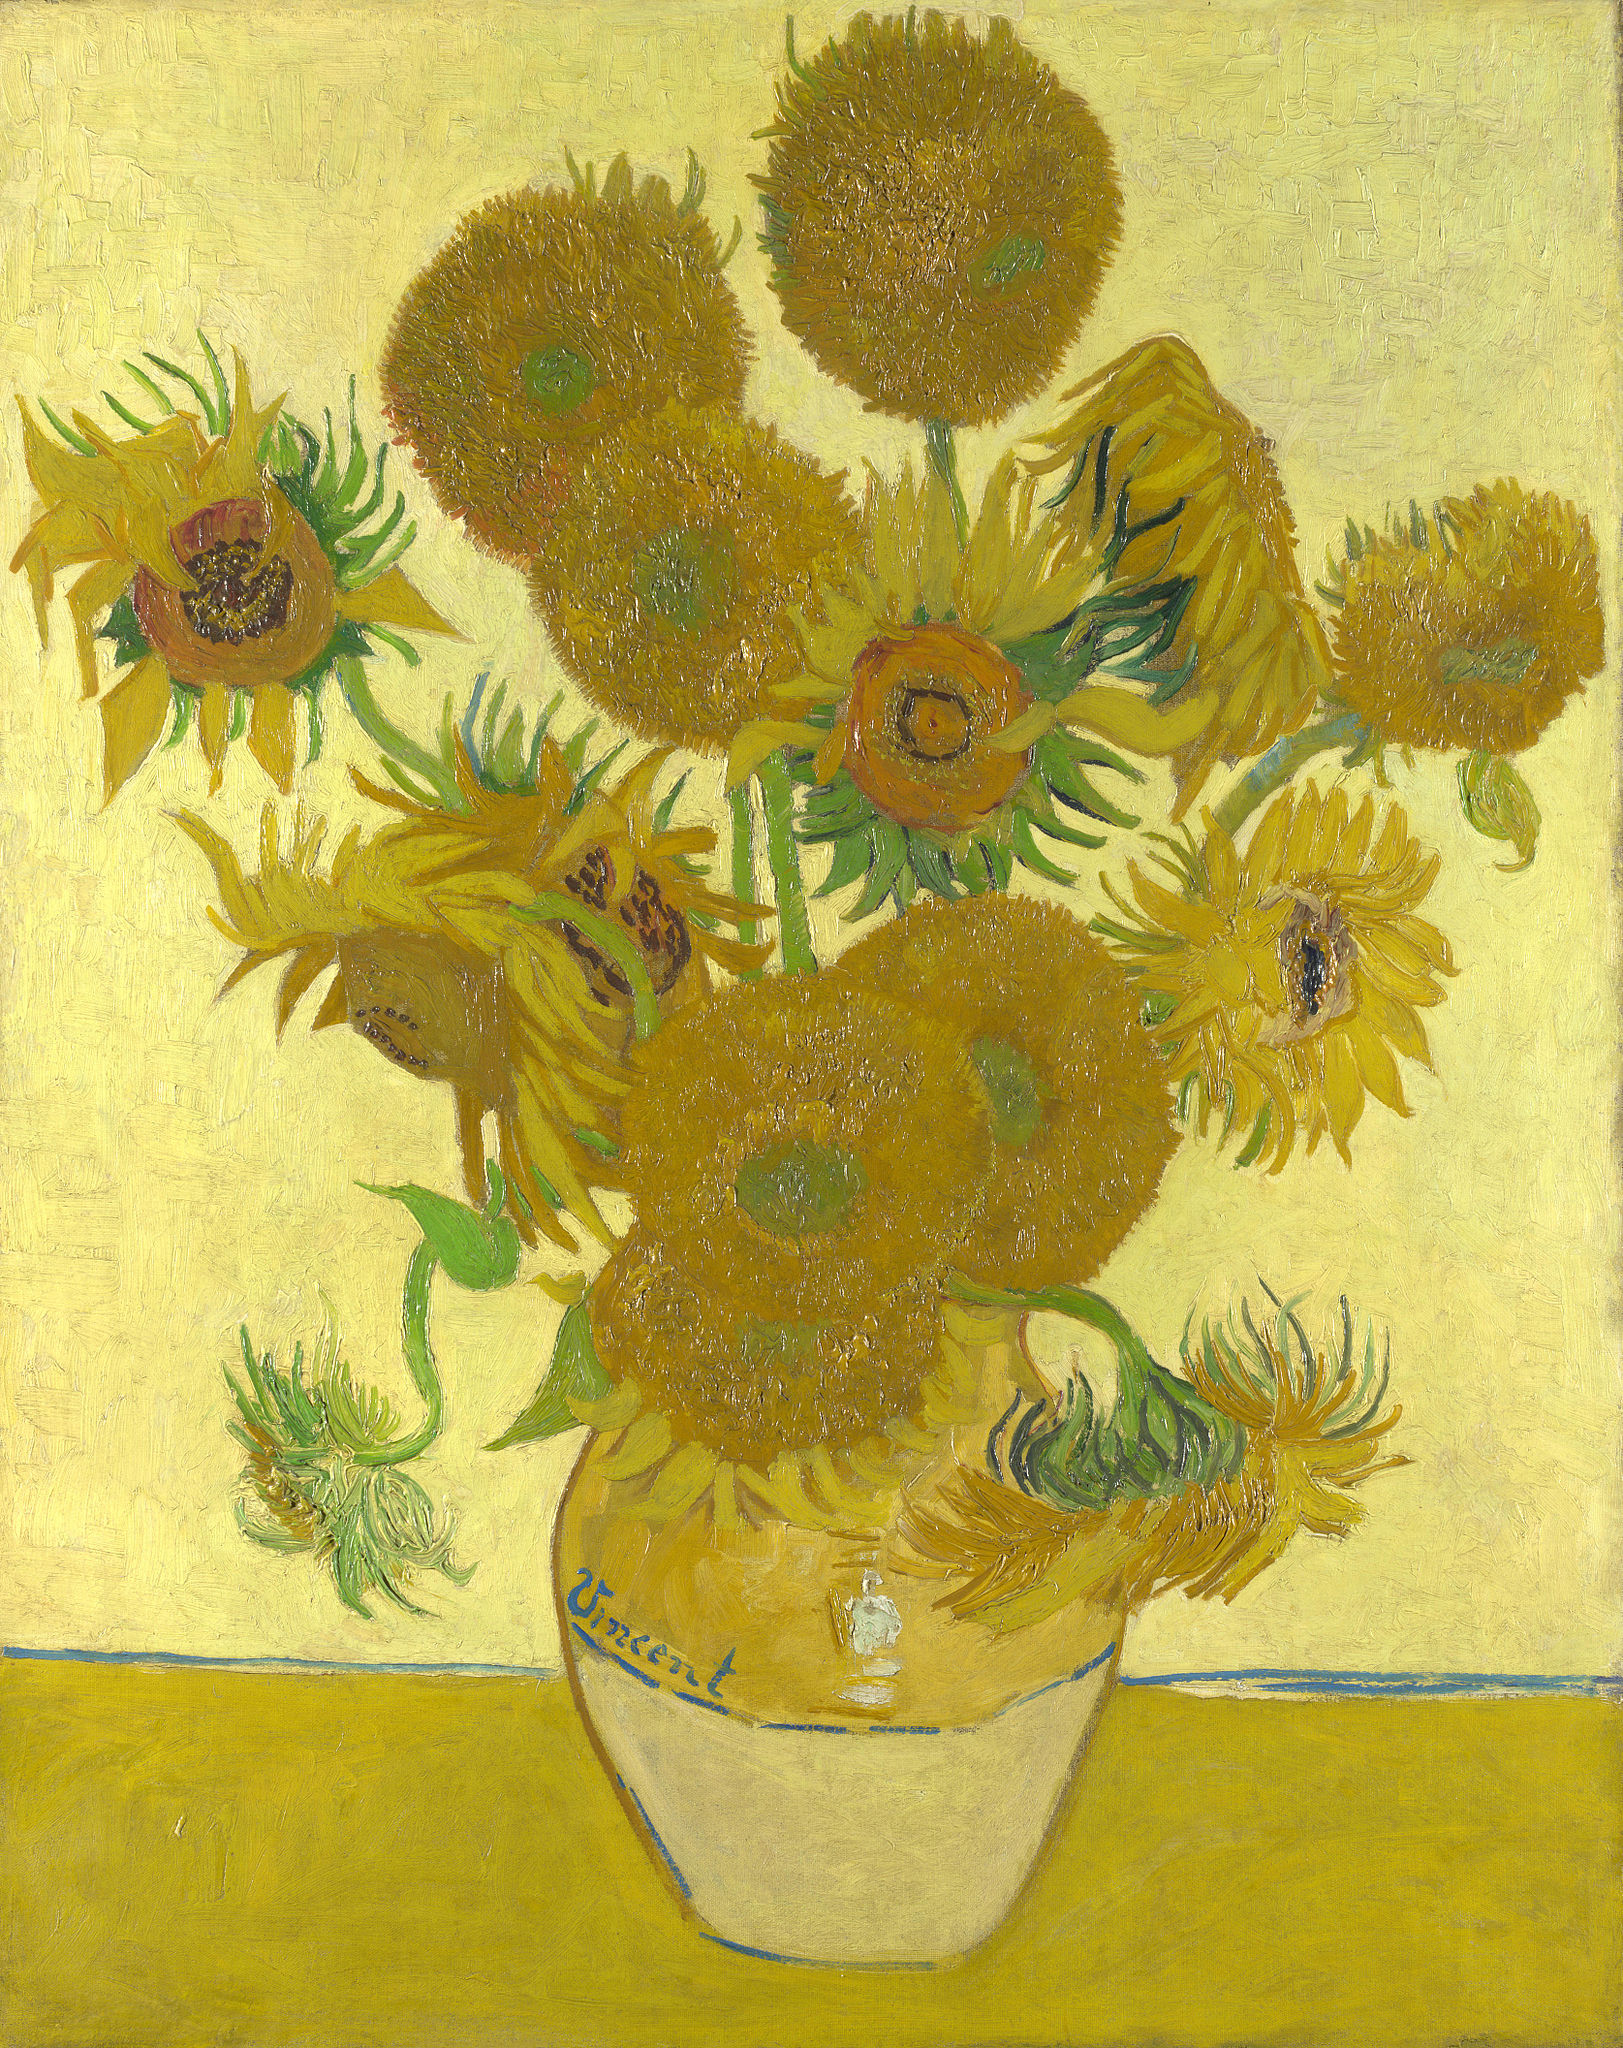 The image is a still life of a vase filled with sunflowers on a yellow table. The sunflowers are arranged in a circular pattern around the vase. The vase is made of a light-colored material and has a curved shape. The background of the image is a yellow wall.